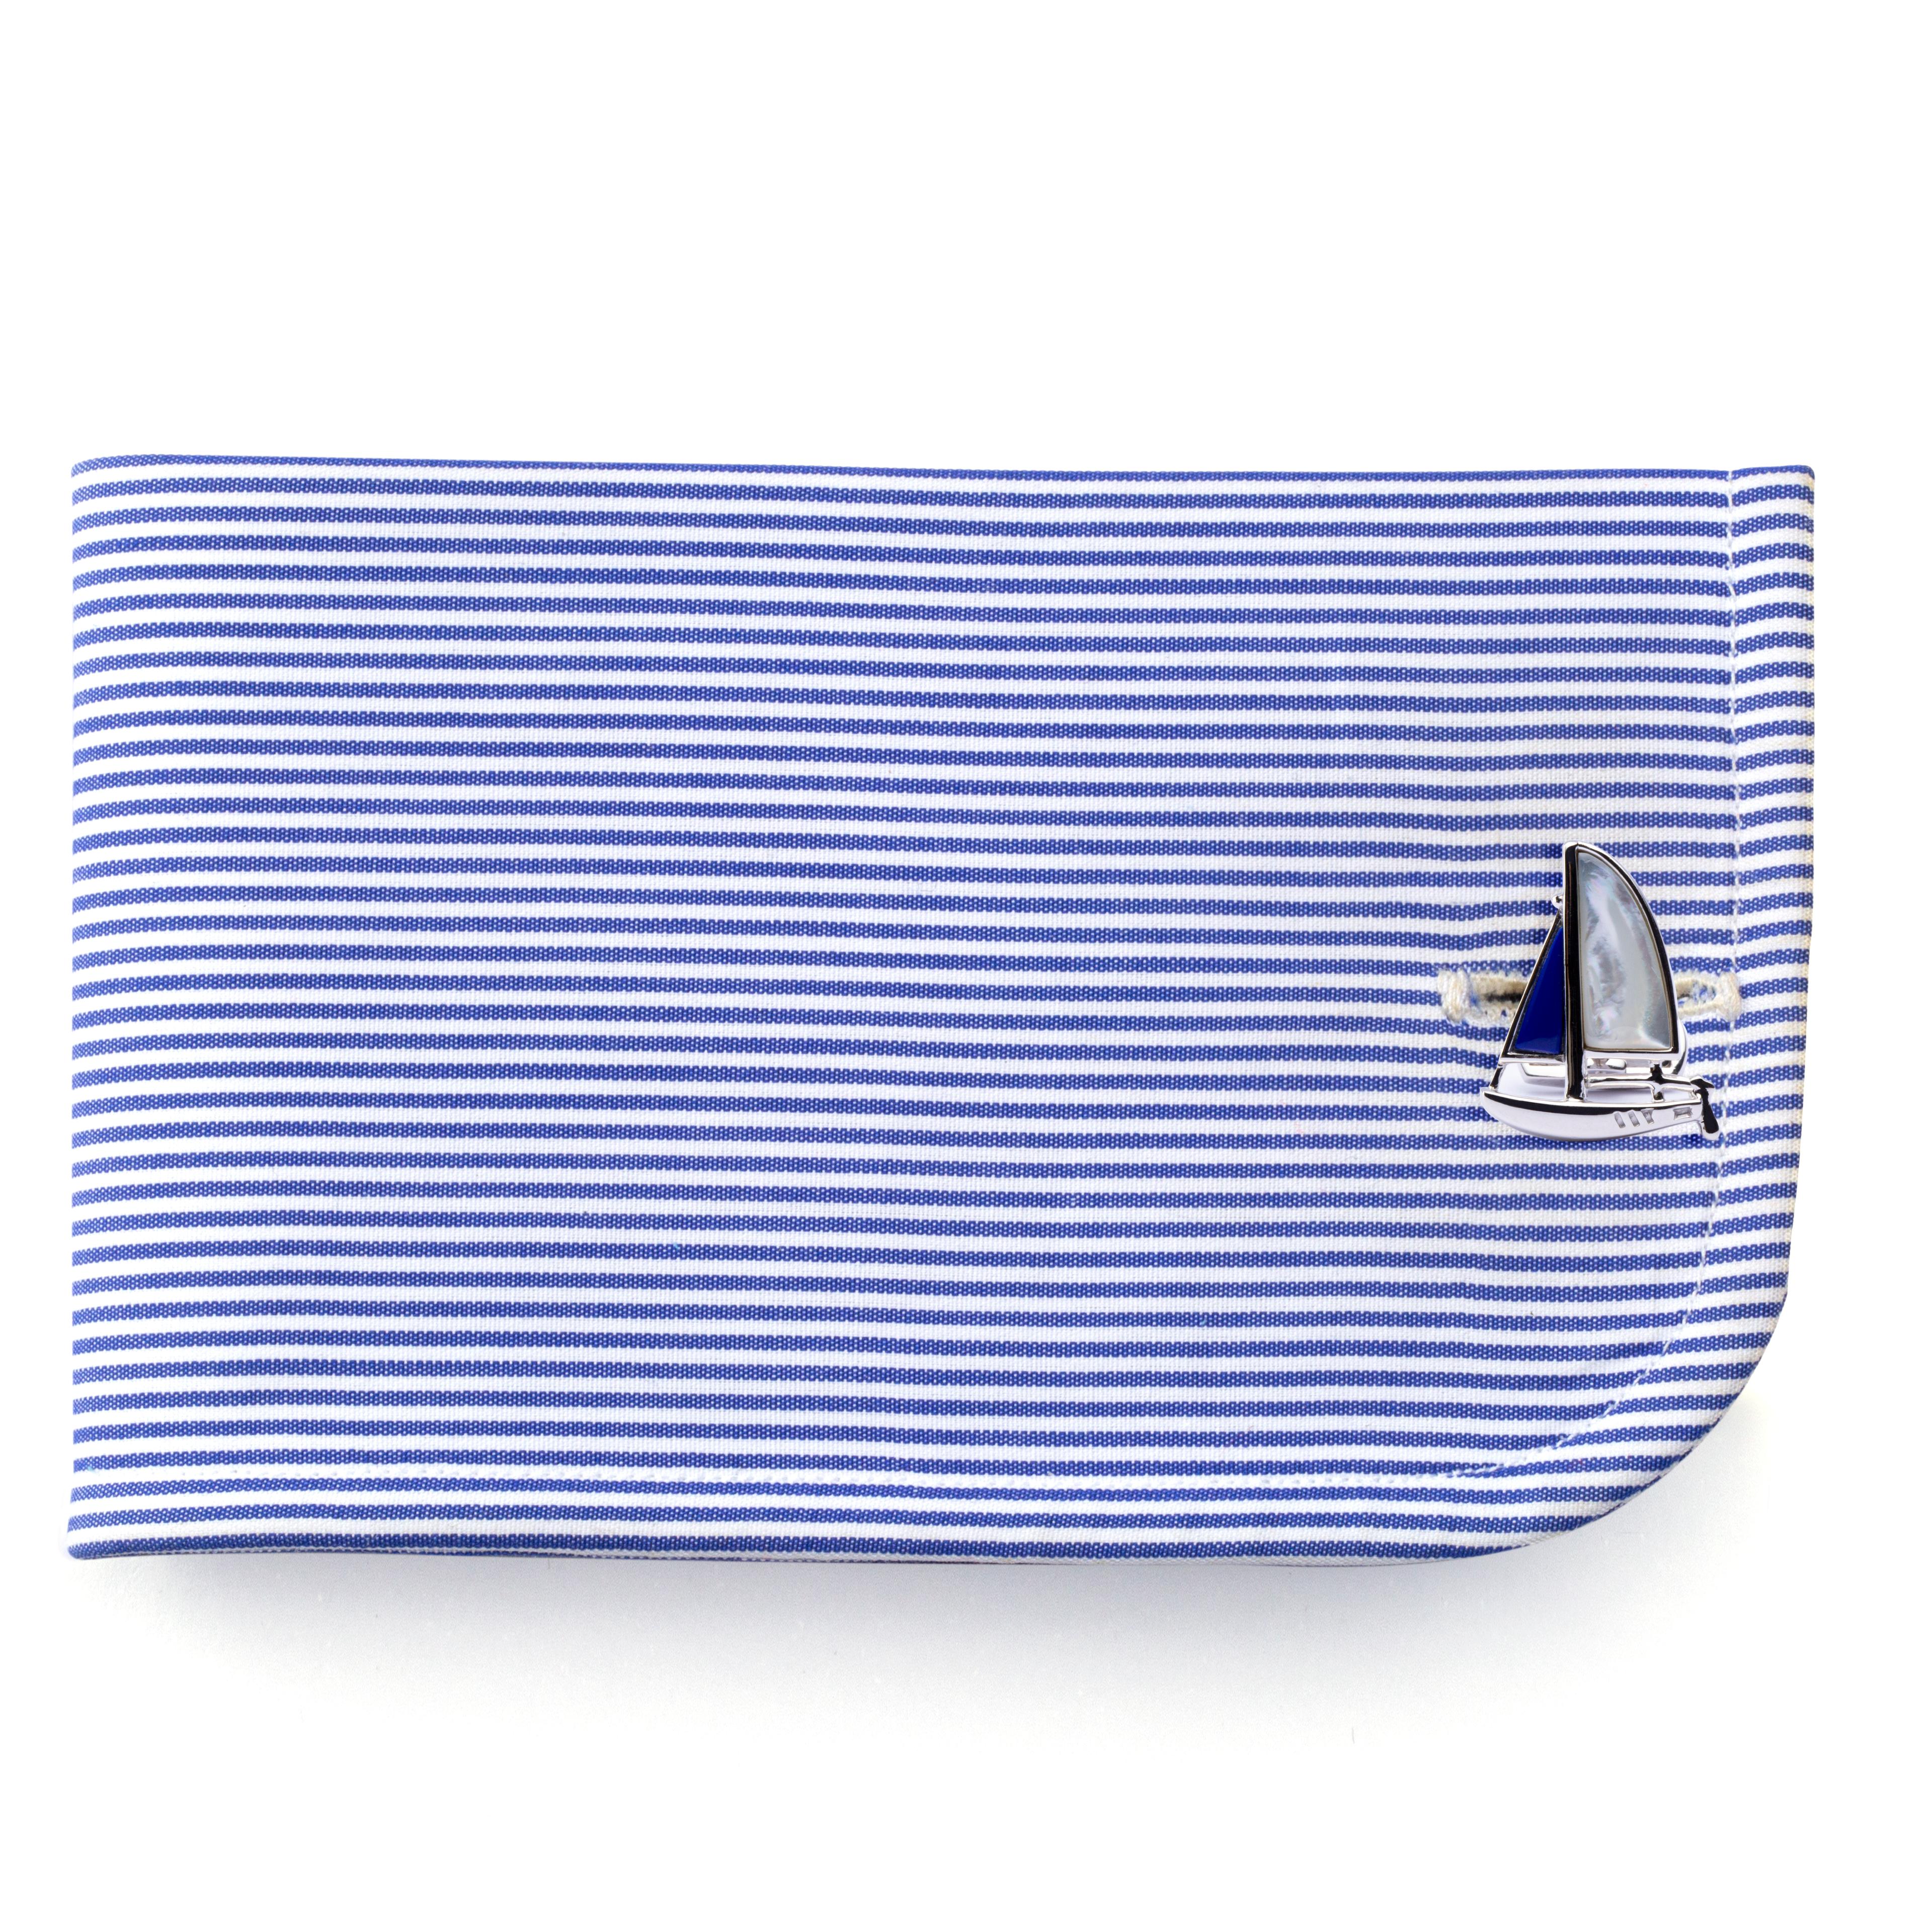 Jona design collection, hand crafted in Italy, Sterling silver sail boat cufflinks with lapis lazuli.  
Dimensions: W x 0.68 in / W x 17.27 mm - H x 0.86 in / H x 21.84 mm.
Alex Jona cufflinks stand out, not only for their special design and for the